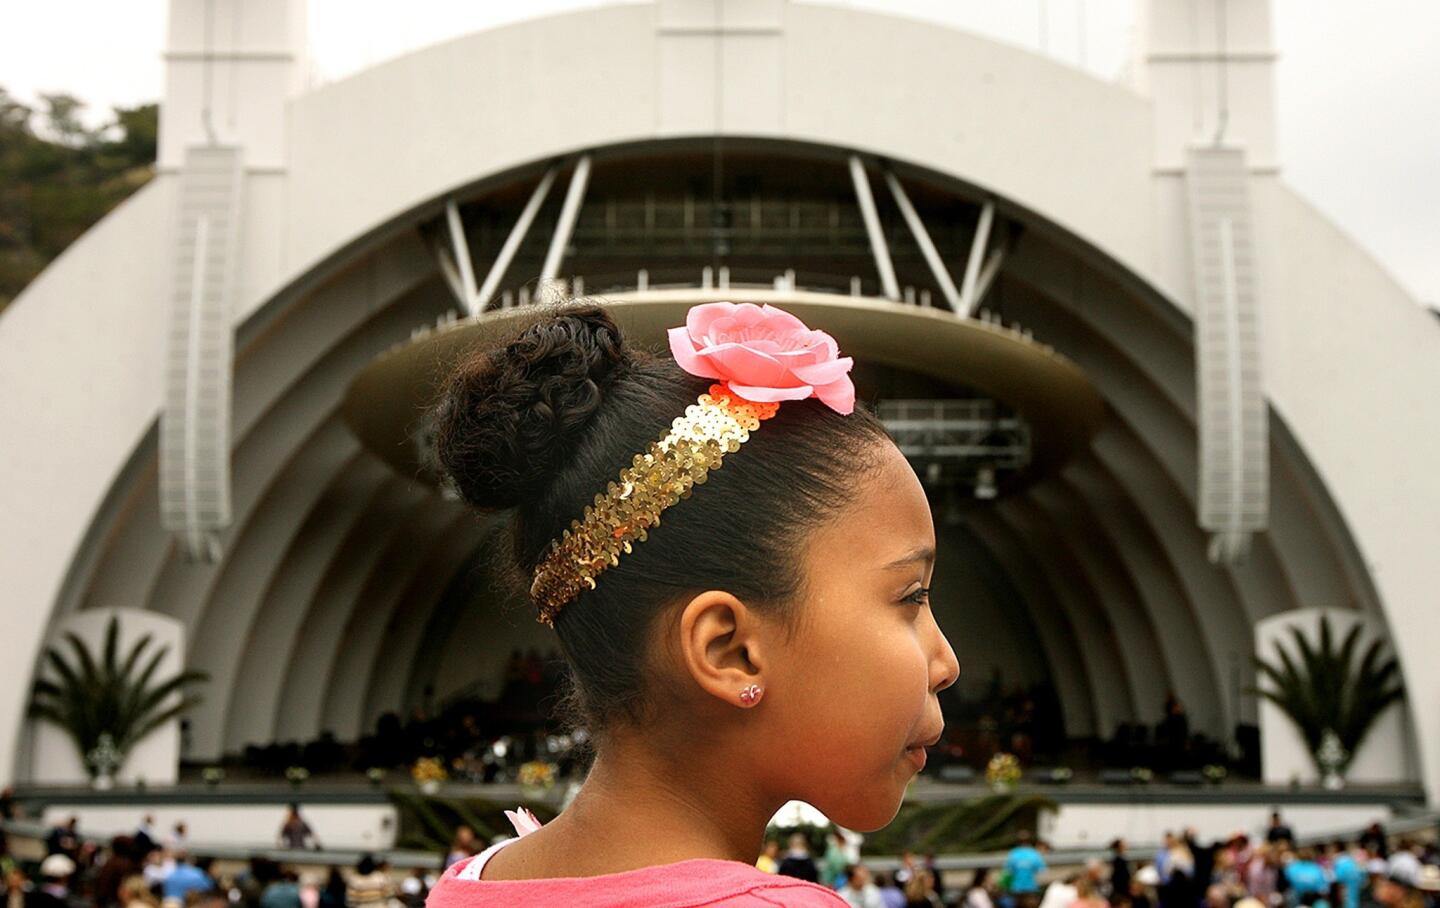 Jeannine Briggs, 9, of Pasadena attends Easter services at the Hollywood Bowl, presented by Bel Air Presbyterian Church and Christian Assembly Church in Eagle Rock.